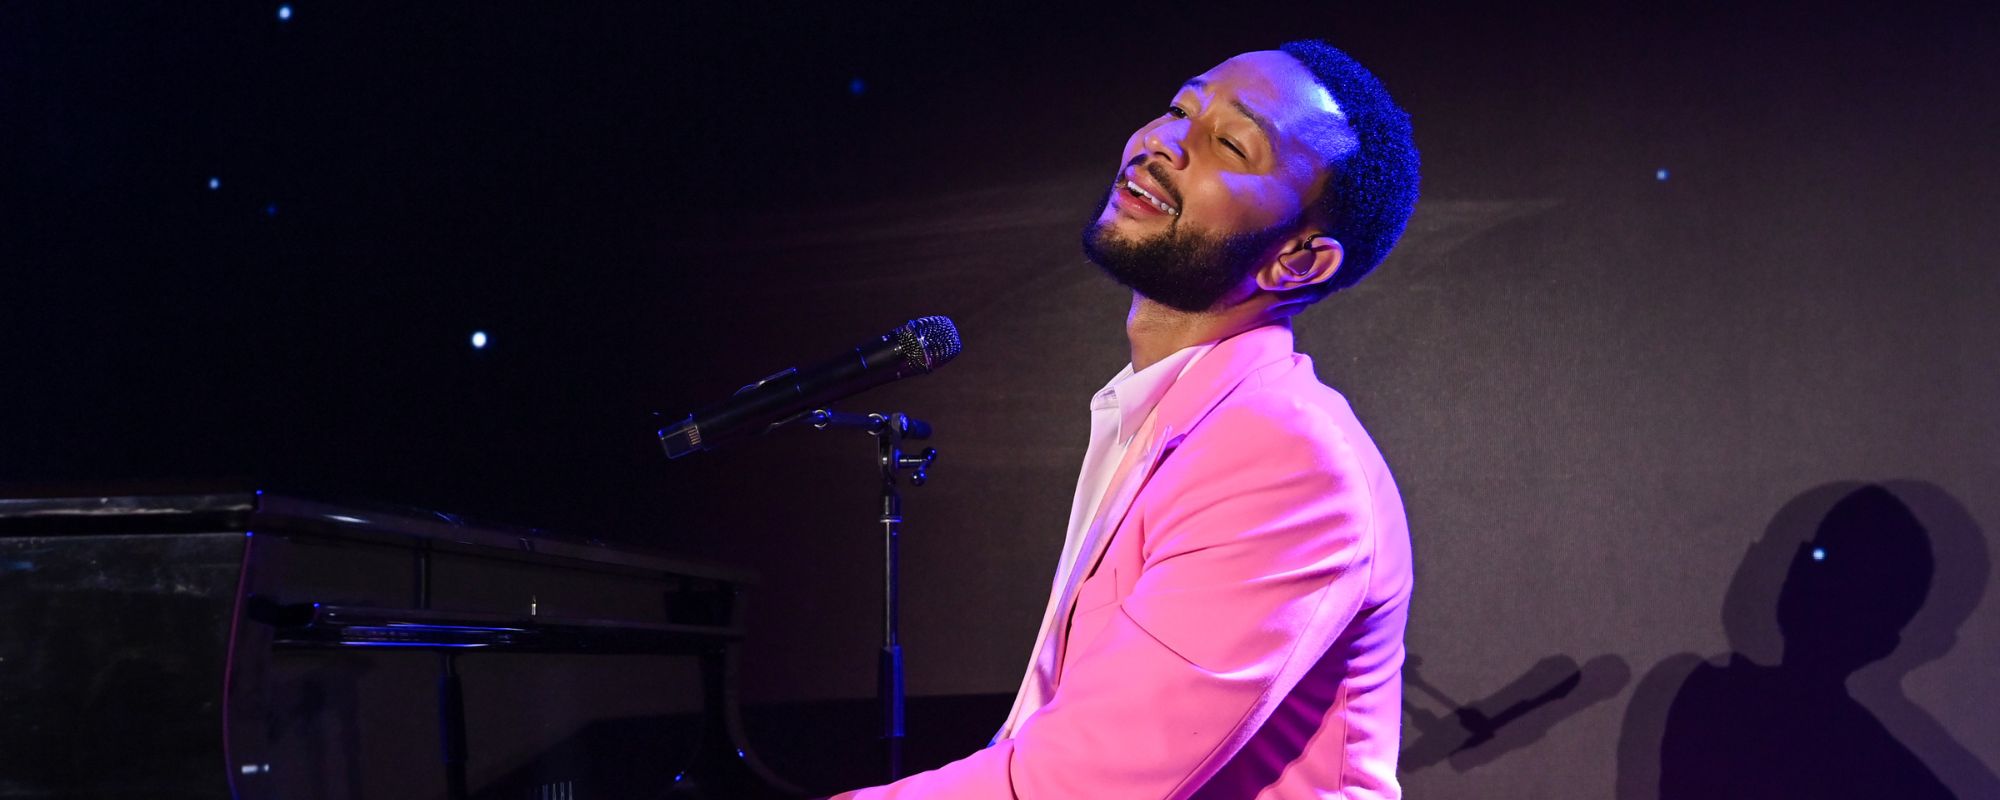 John Legend Breaks Silence on Leaving ‘The Voice’, Issues 3-Word Message on Returning in the Future